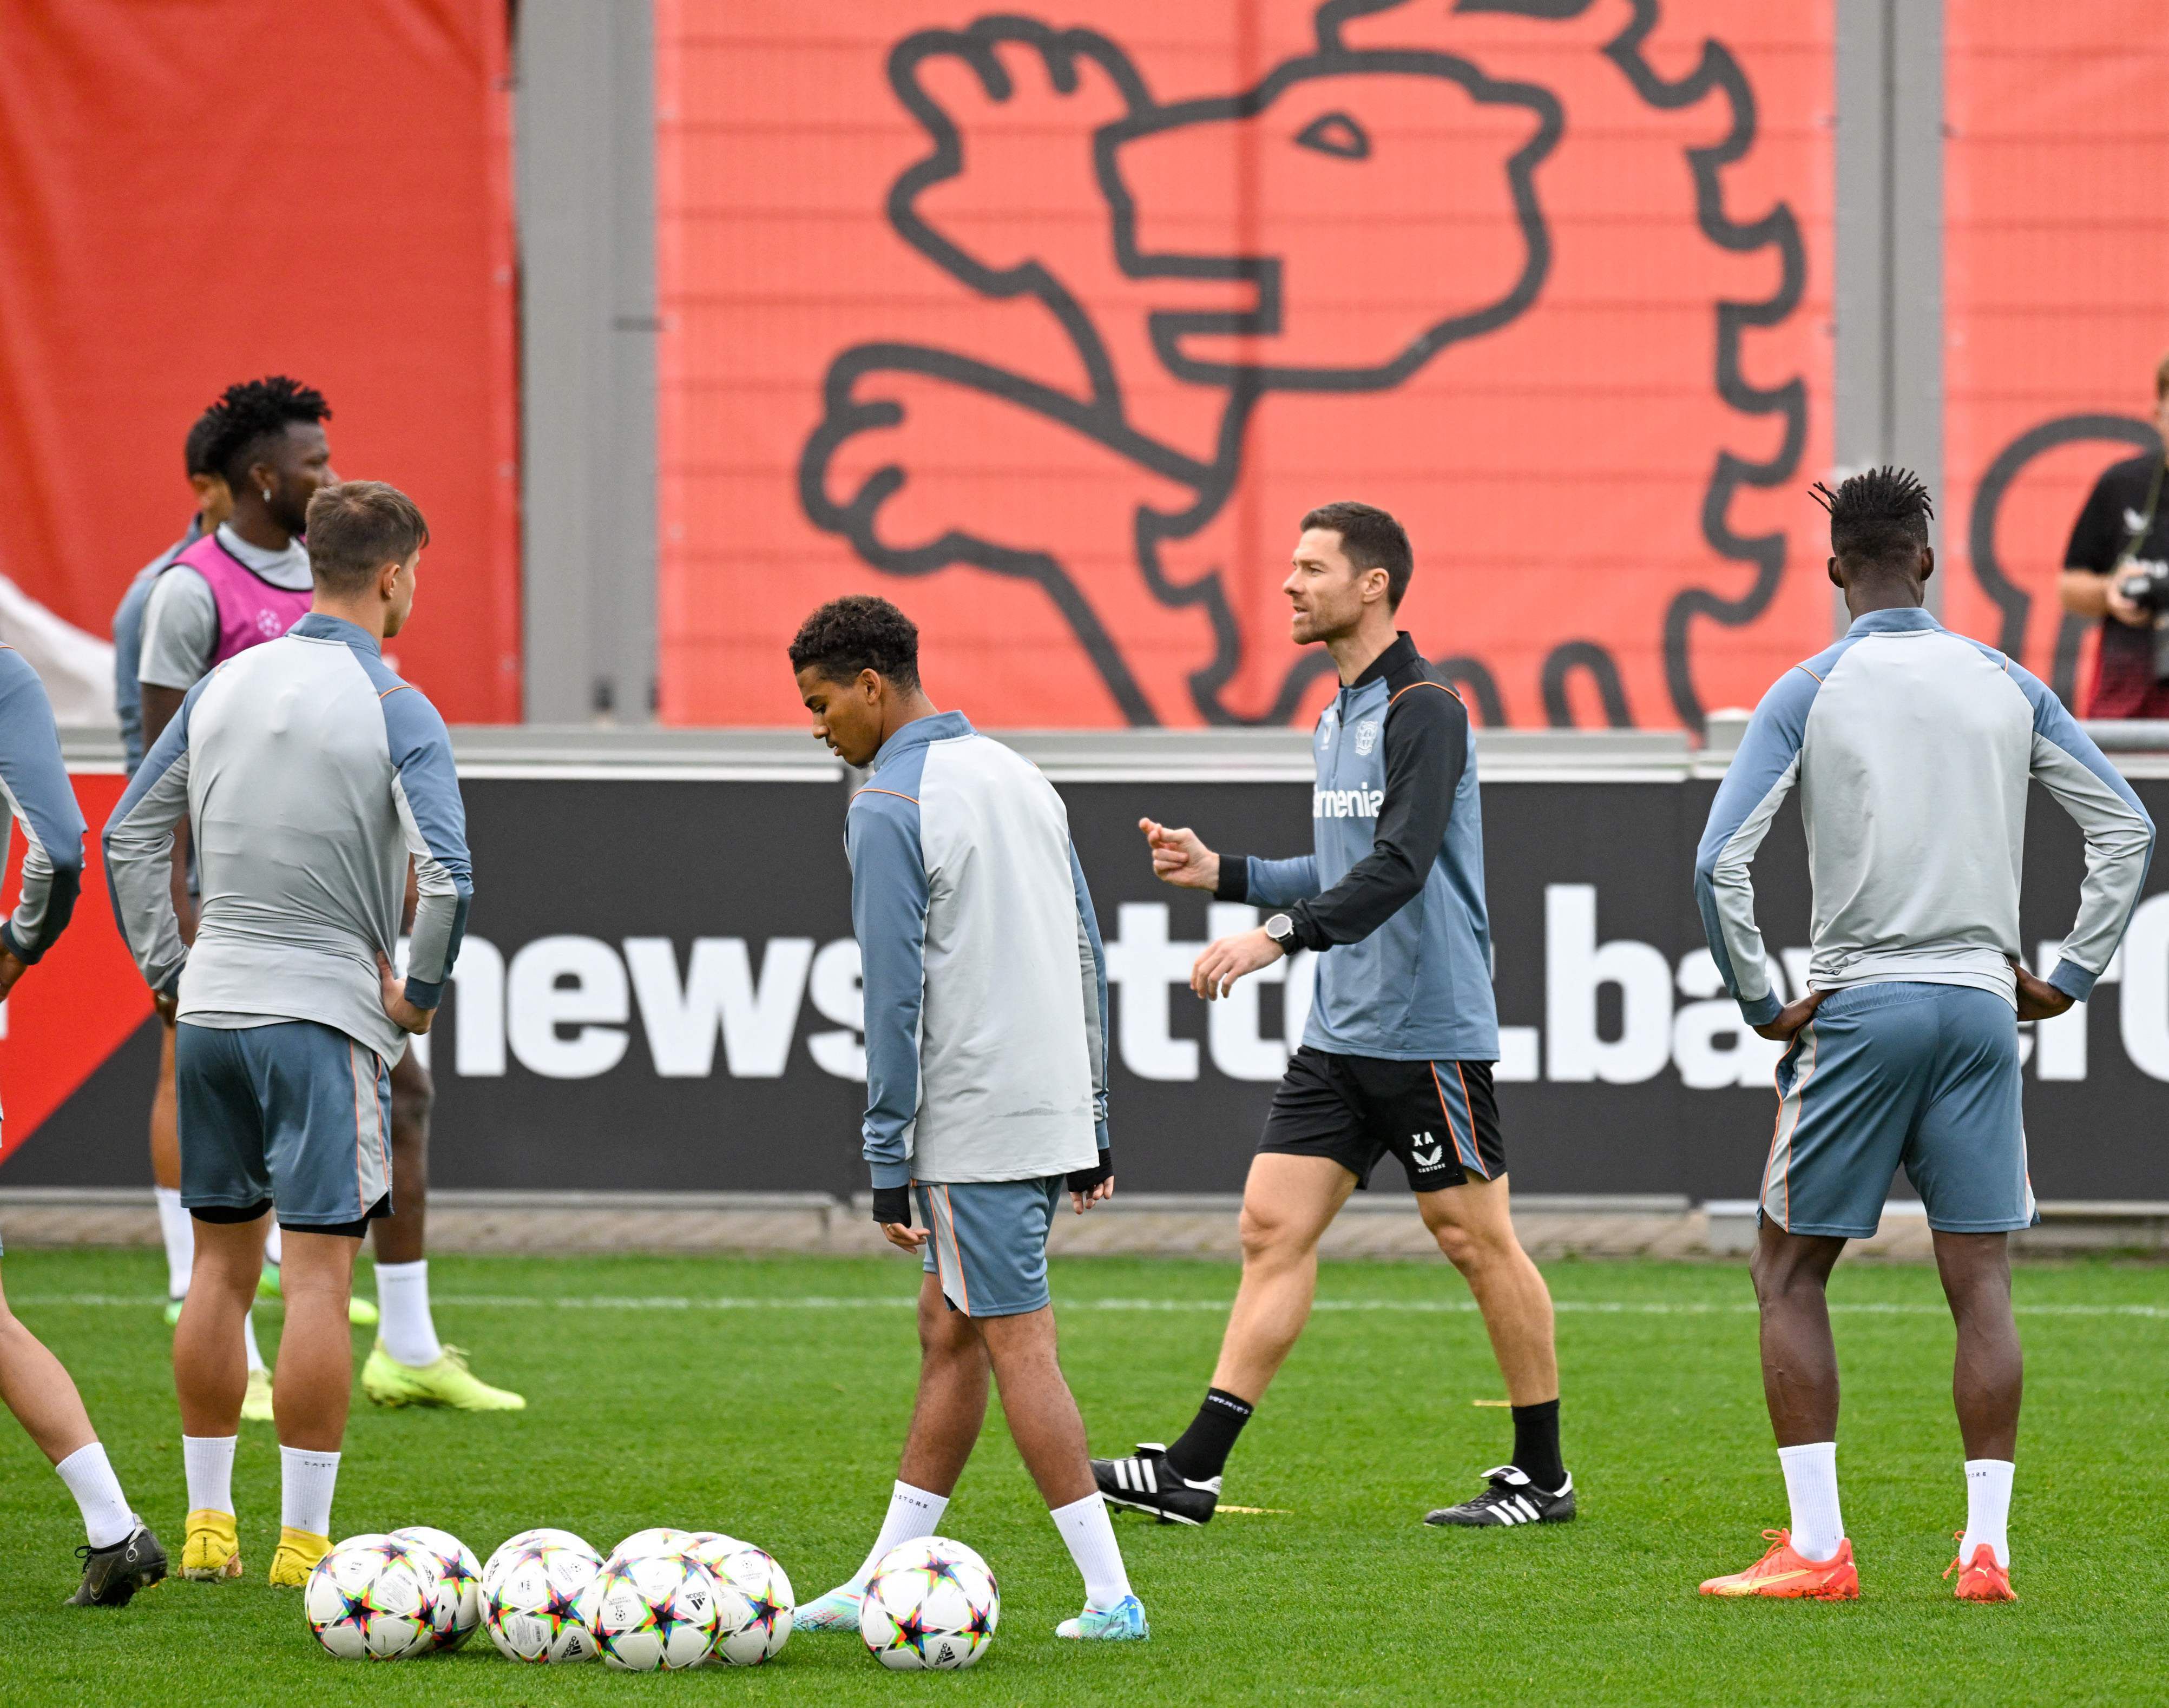 Leverkusen's Spanish head coach Xabi Alonso (2nd R) gives instructions to the players during a training session in Leverkusen, western Germany, on October 31, 2022, on the eve of the UEFA Champions League Group B football match Bayer 04 Leverkusen vs Club Brugge. (Photo by SASCHA SCHUERMANN / AFP)